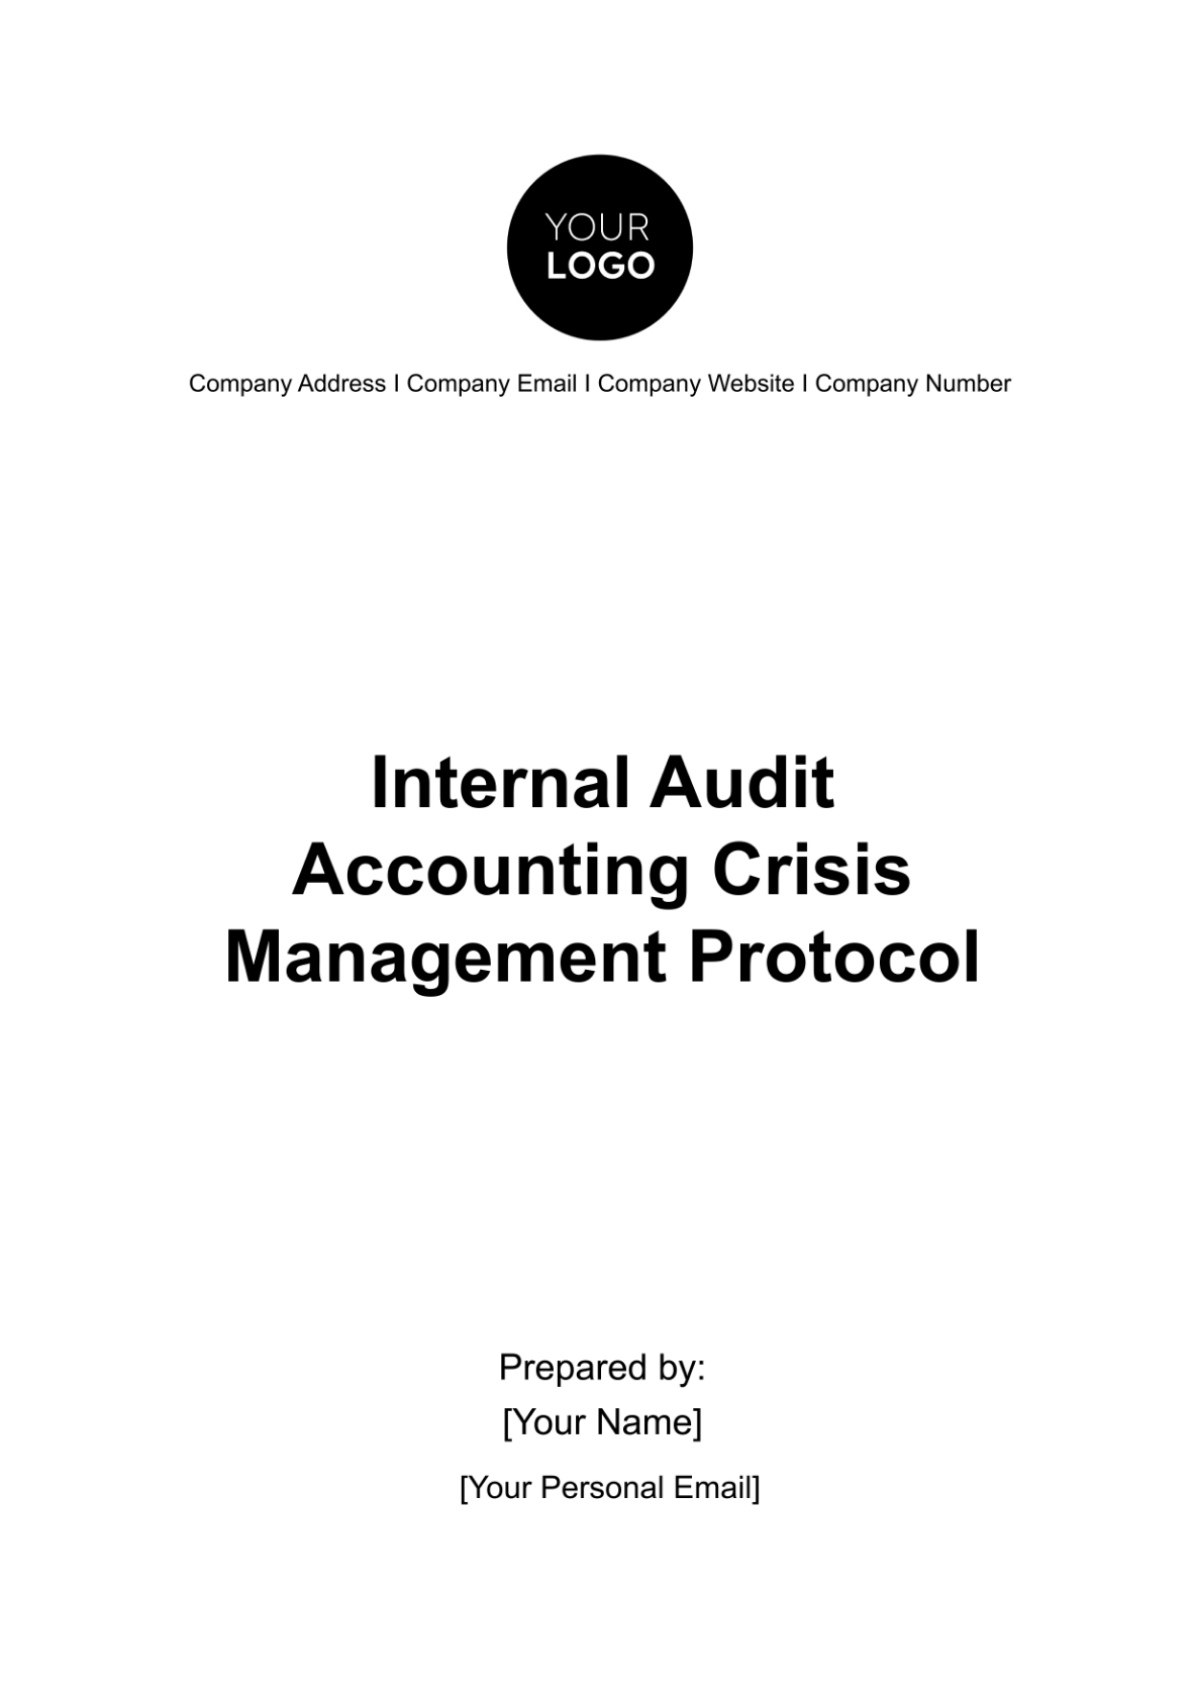 Internal Audit Accounting Crisis Management Protocol Template